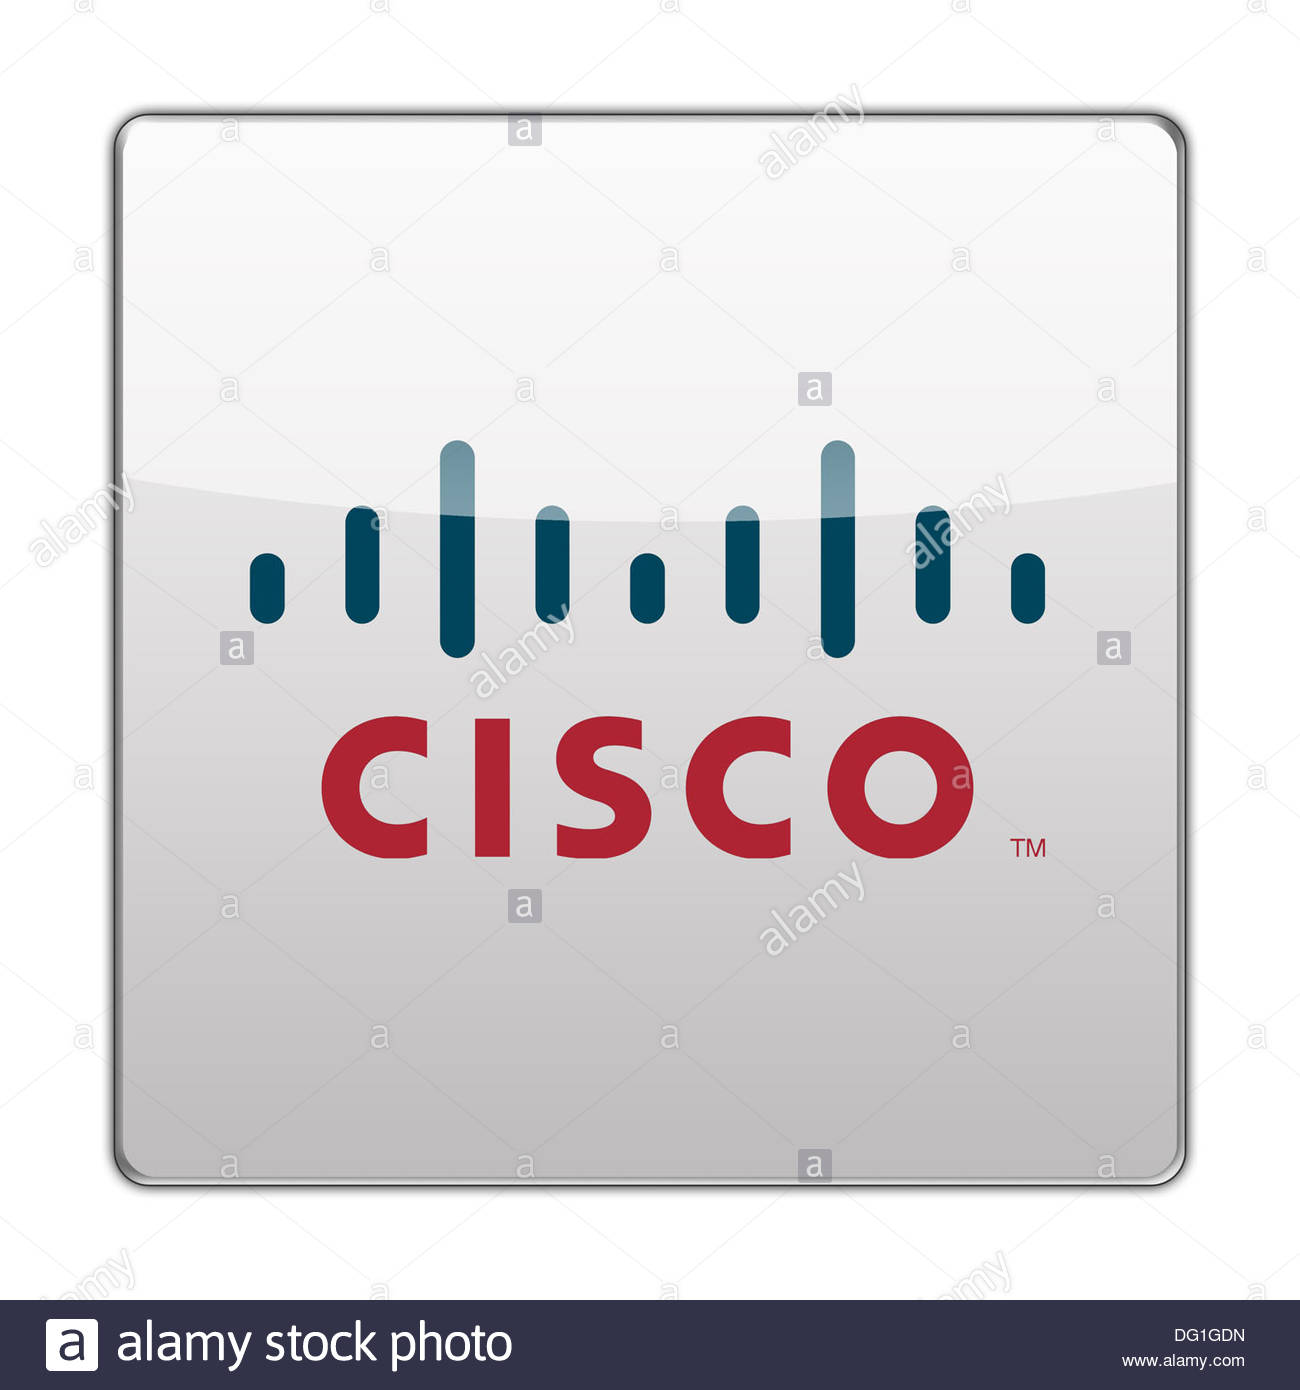 Cisco Switches and Hubs. Cisco icons, shapes, stencils and symbols